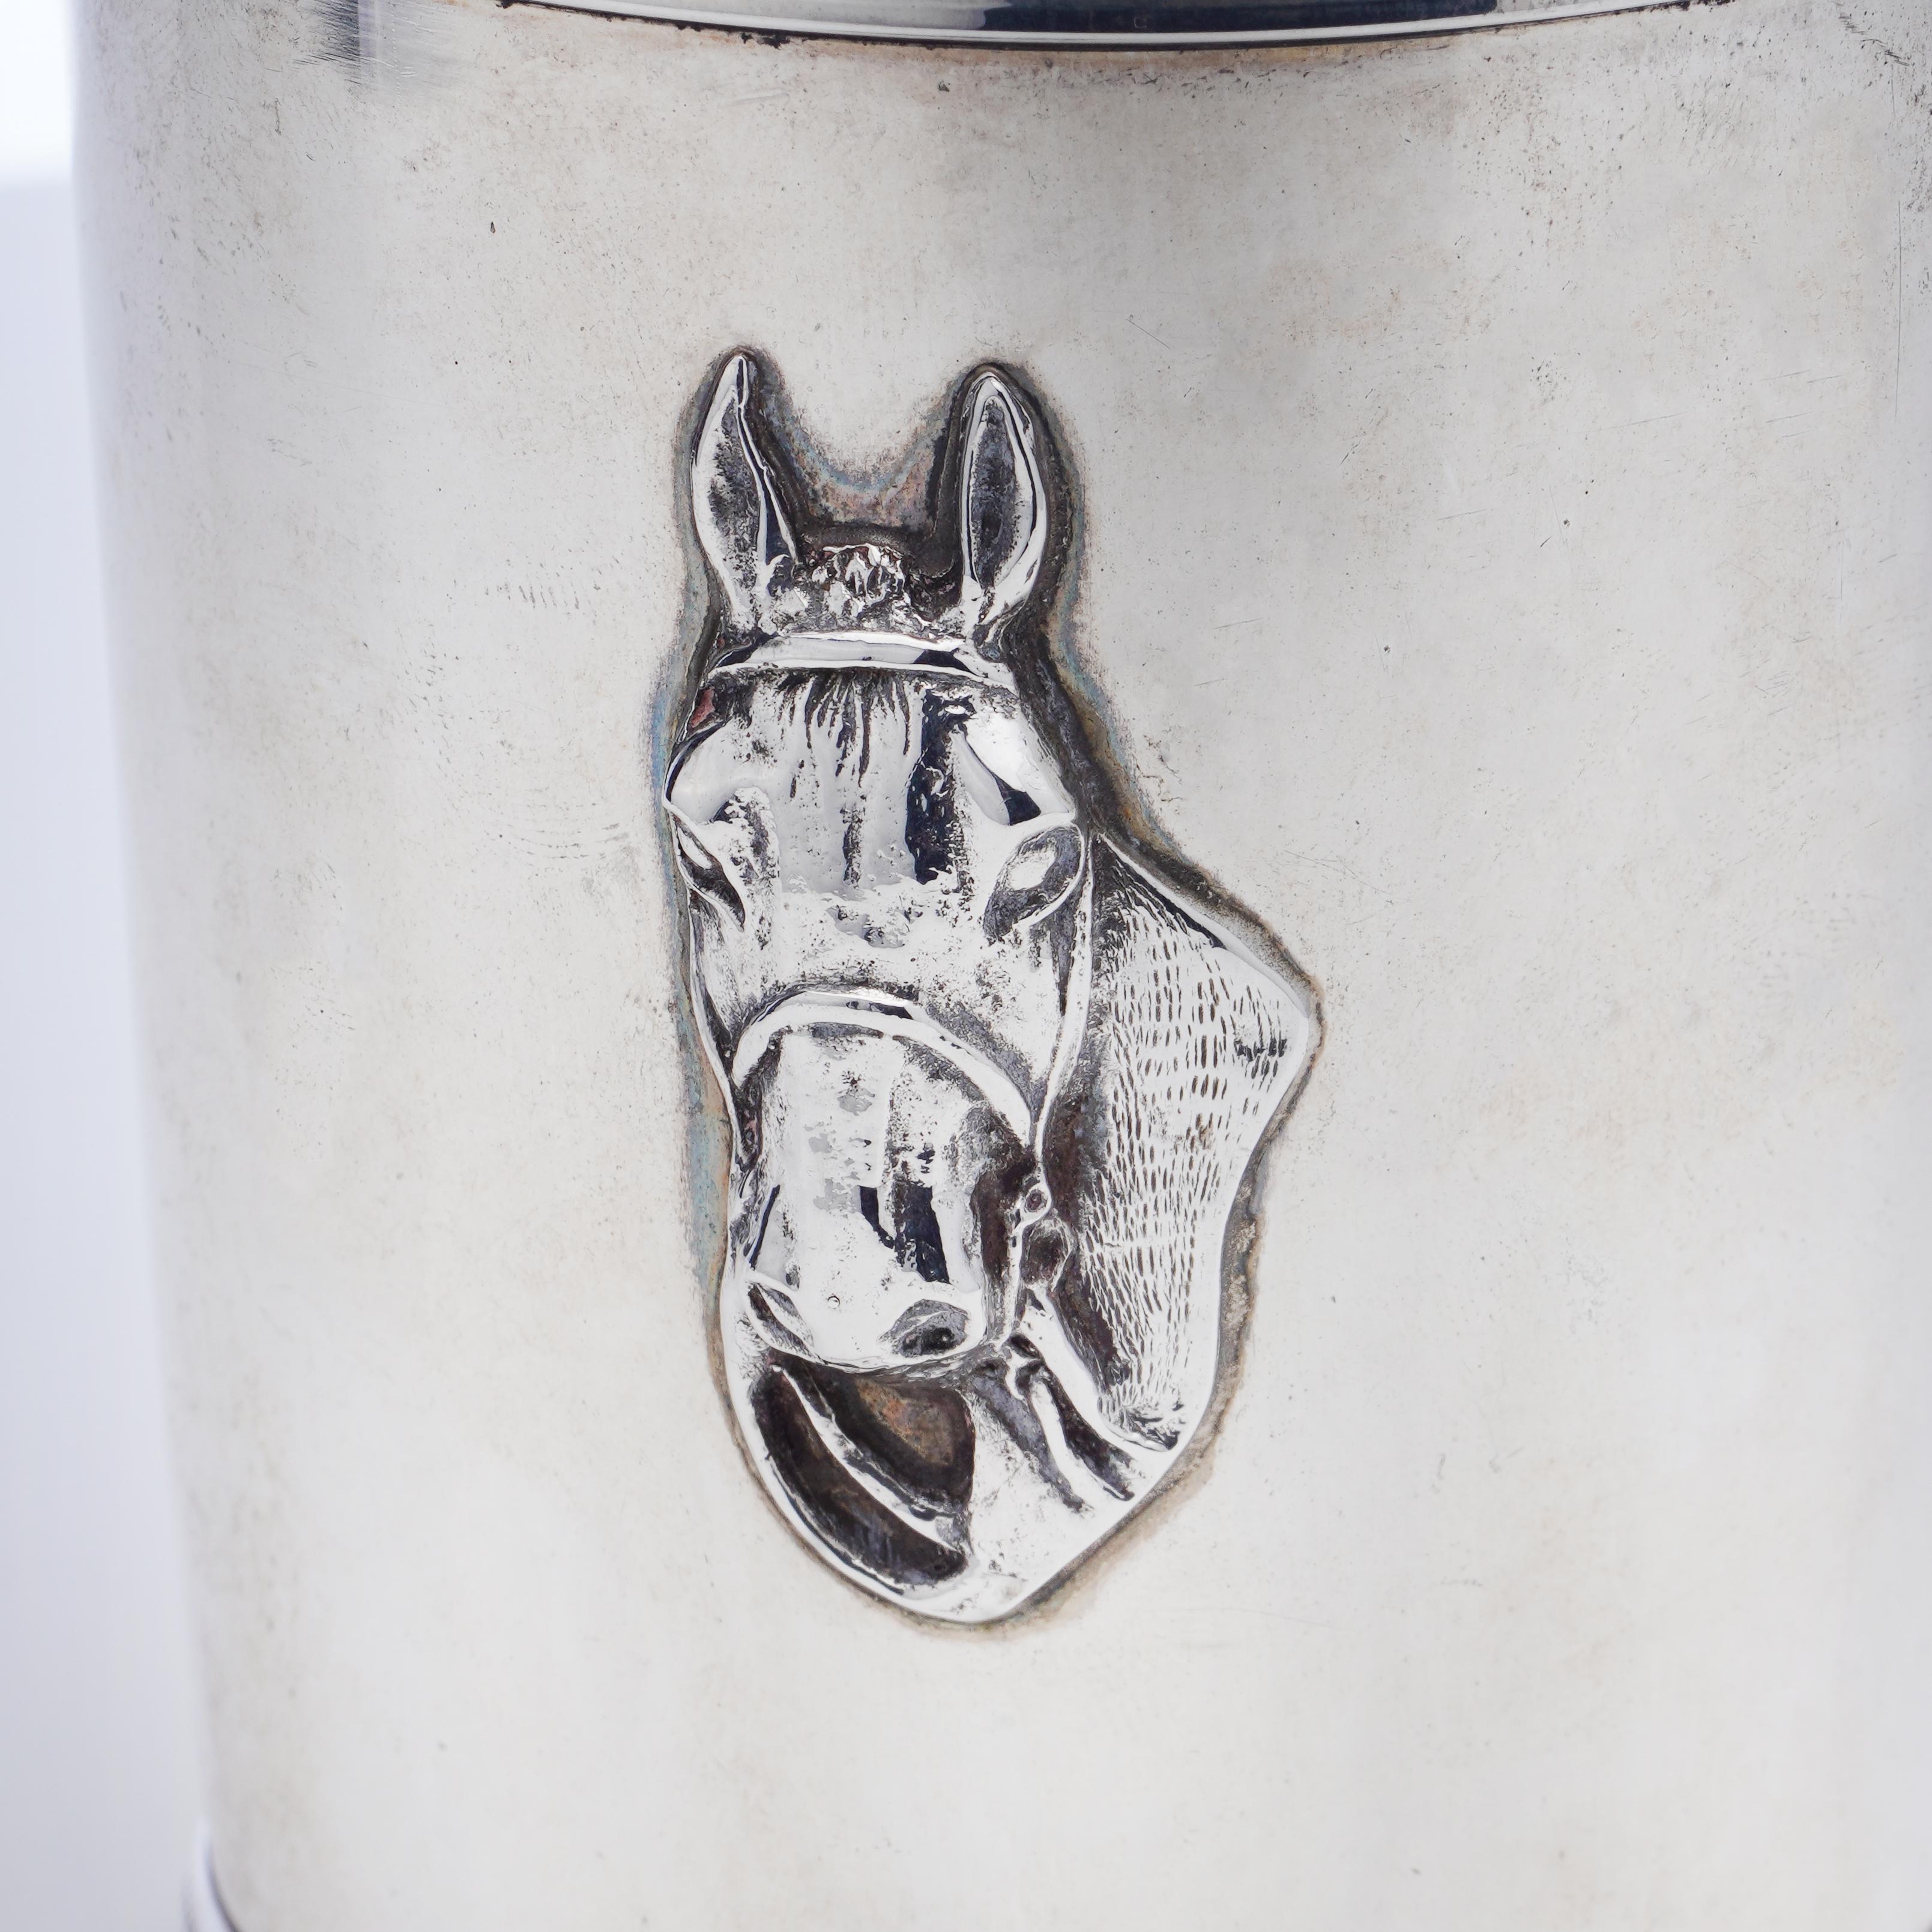 Vintage sterling silver mint julep cup beaker with embossed horse's head decoration, monogram, and engravings on the base. 
Made in the U.S., Ca. 1950s 
Maker: Benjamin Trees
Fully hallmarked.
The base has an engraving '' When you have a drink